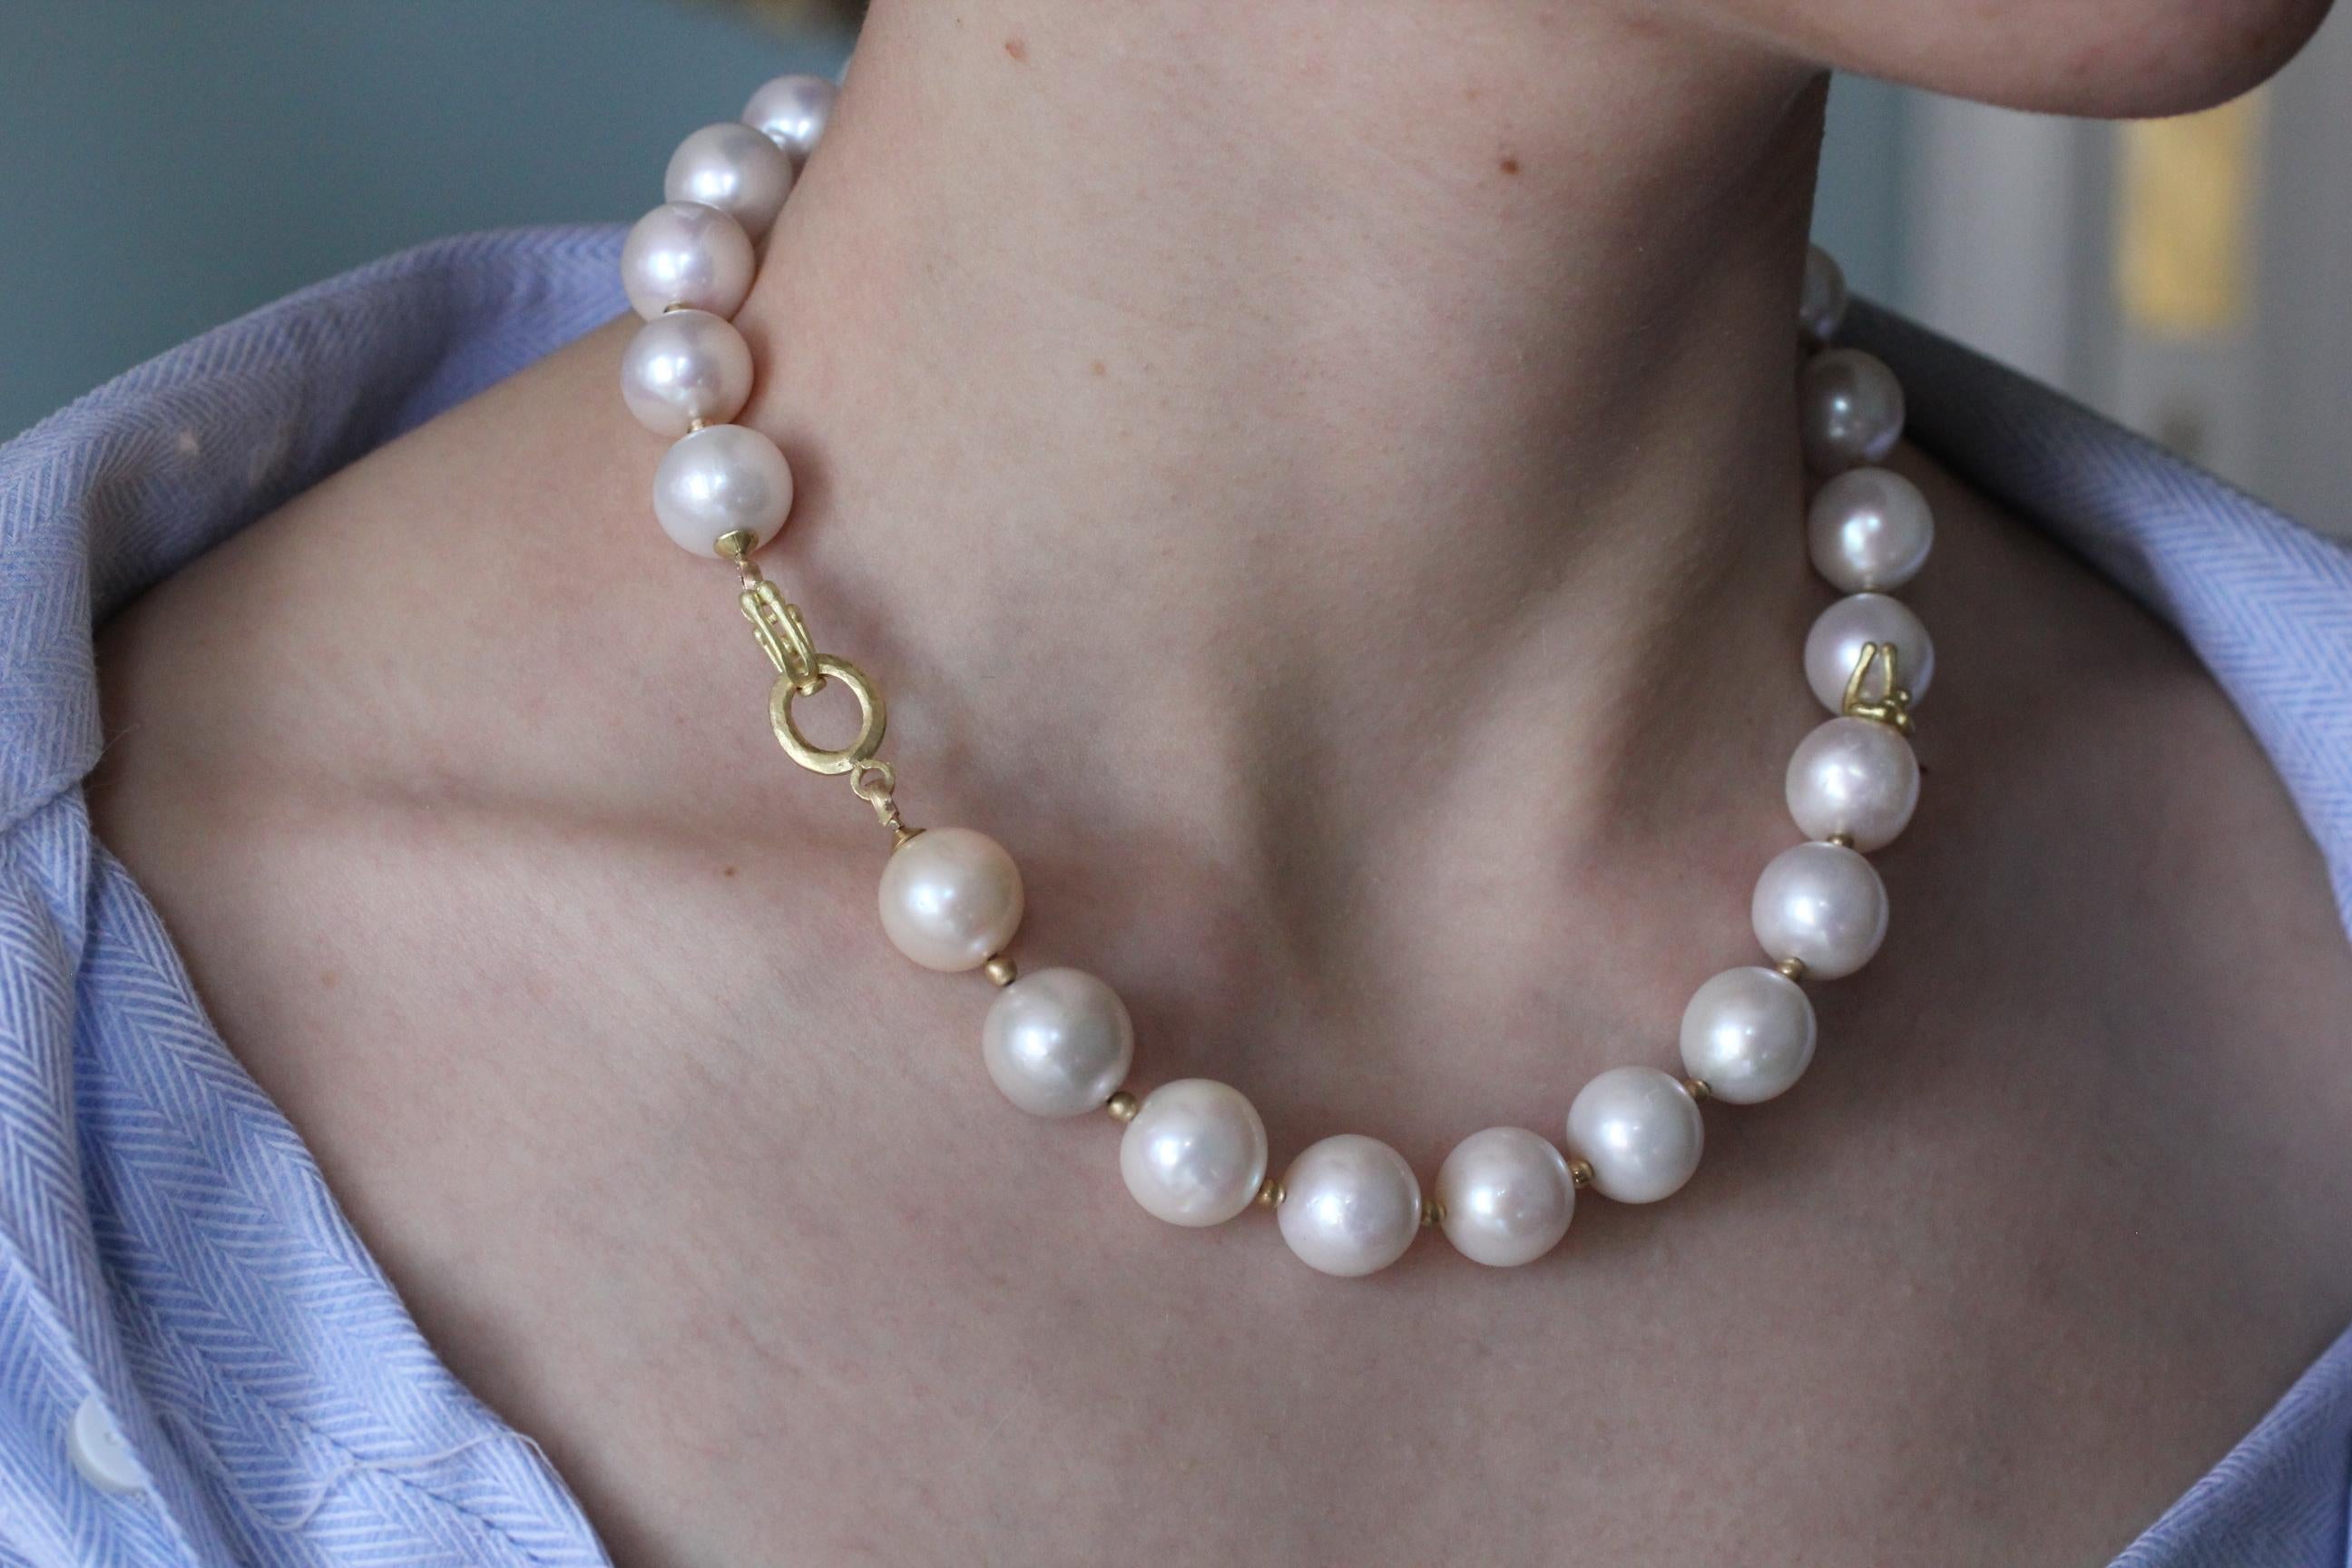 The Light. This White South Sea pearl beaded handmade choker necklace is elegant in its clean beautiful versatility. Great as a gift for a Bride, a Wedding, Christmas or any other holiday occasion. Beautiful lustrous white mostly round pearls are